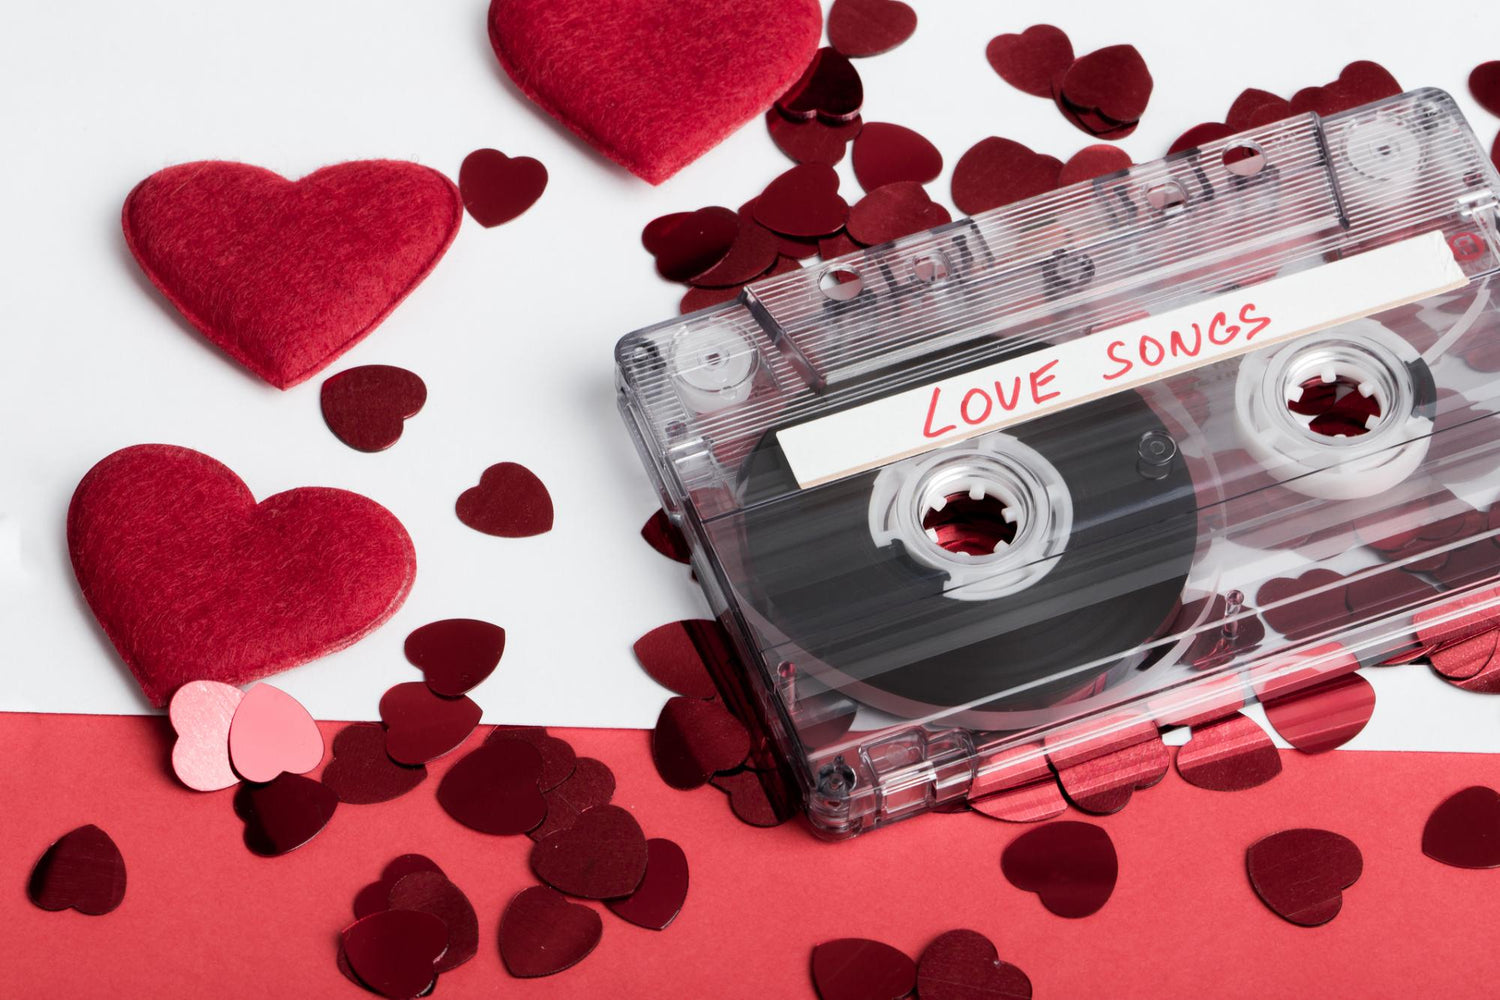 Top Karaoke Love Songs for a Valentine's Day Serenade